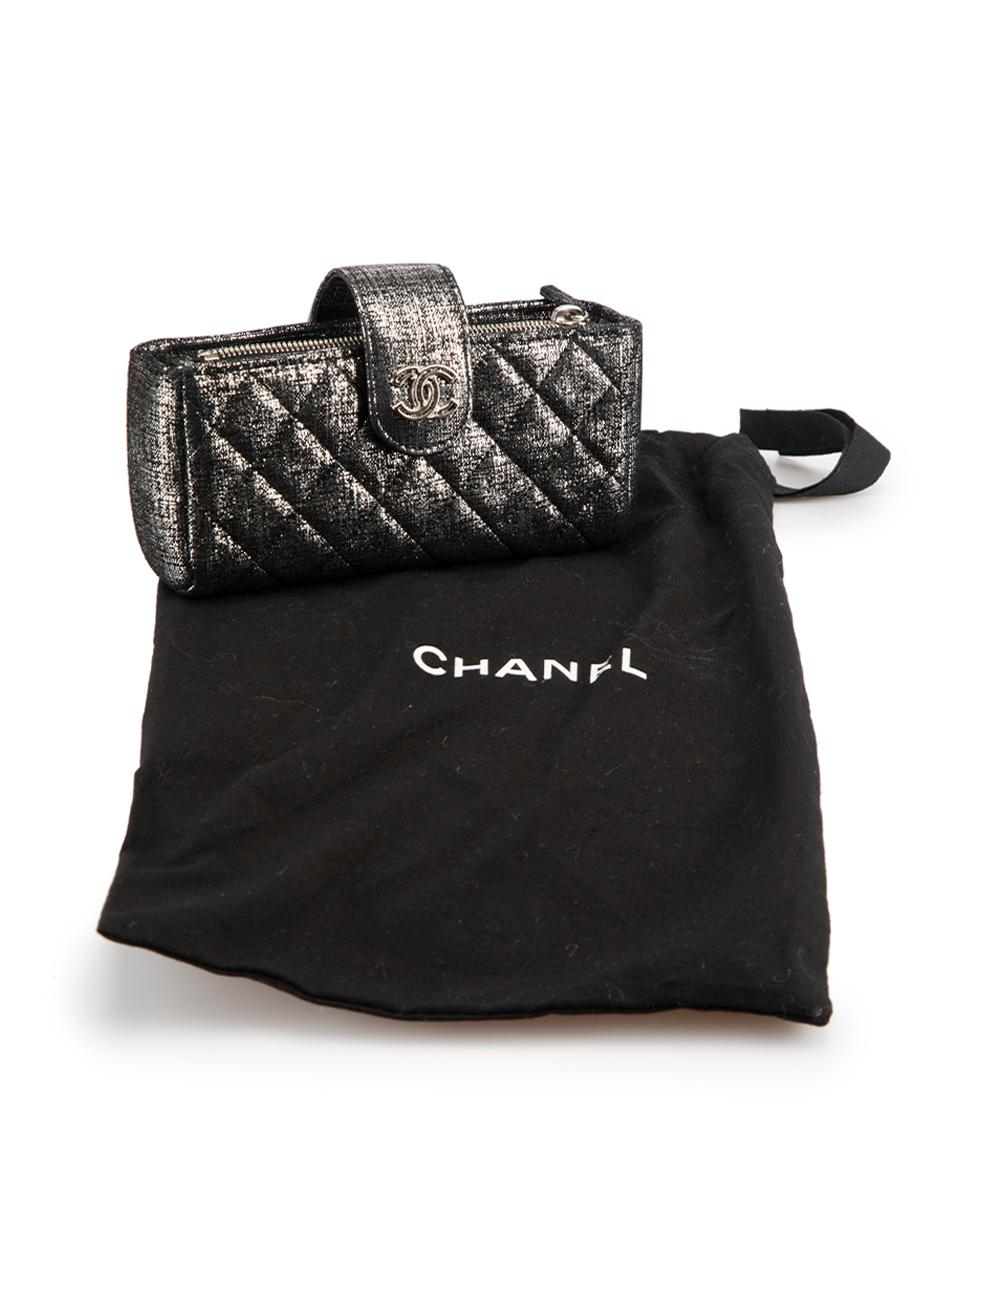 Chanel Women's Black & Silver Shimmer Quilted Interlocking CC Phone Pouch 3